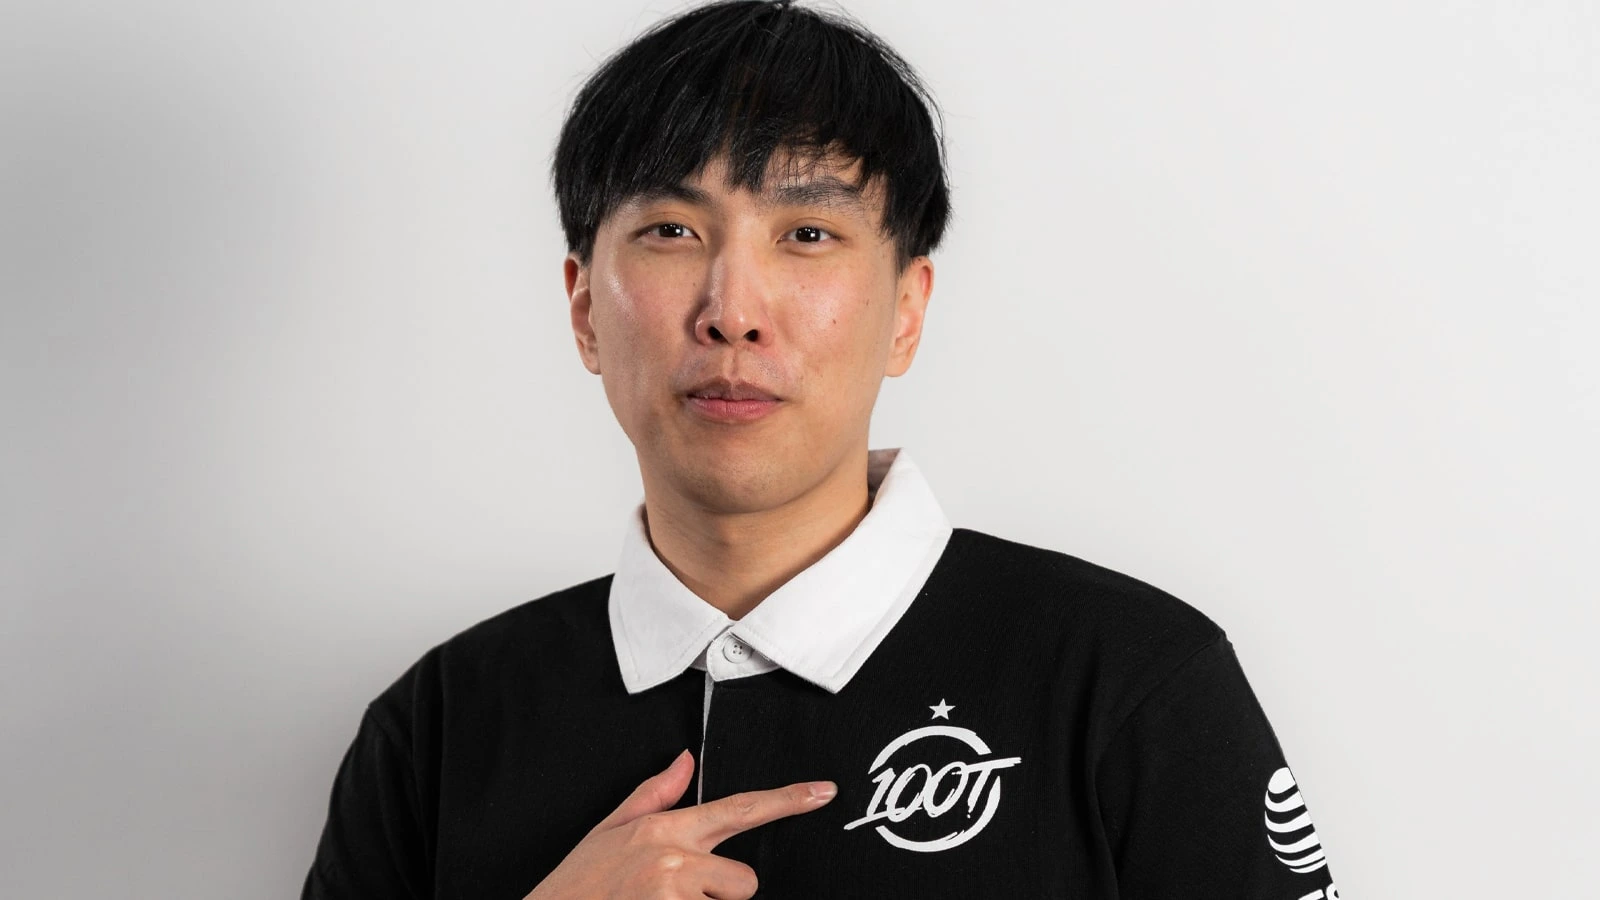 Doublelift faces backlash after statements on LCS walkout